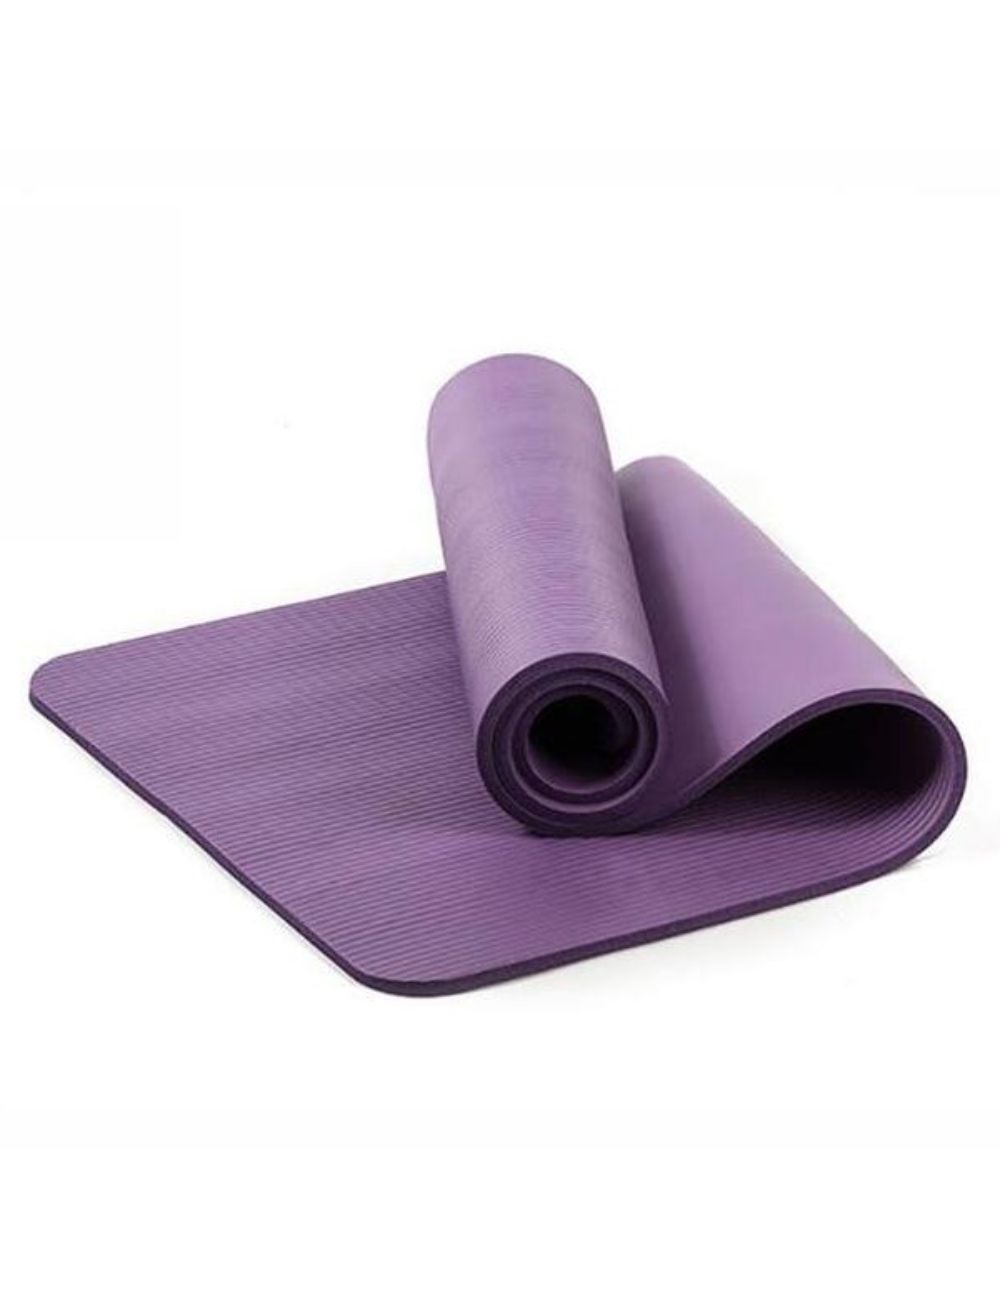 WGXYQ Yoga Mats Fitness Exercise Mat 5mm Natural Flax Rubber Non